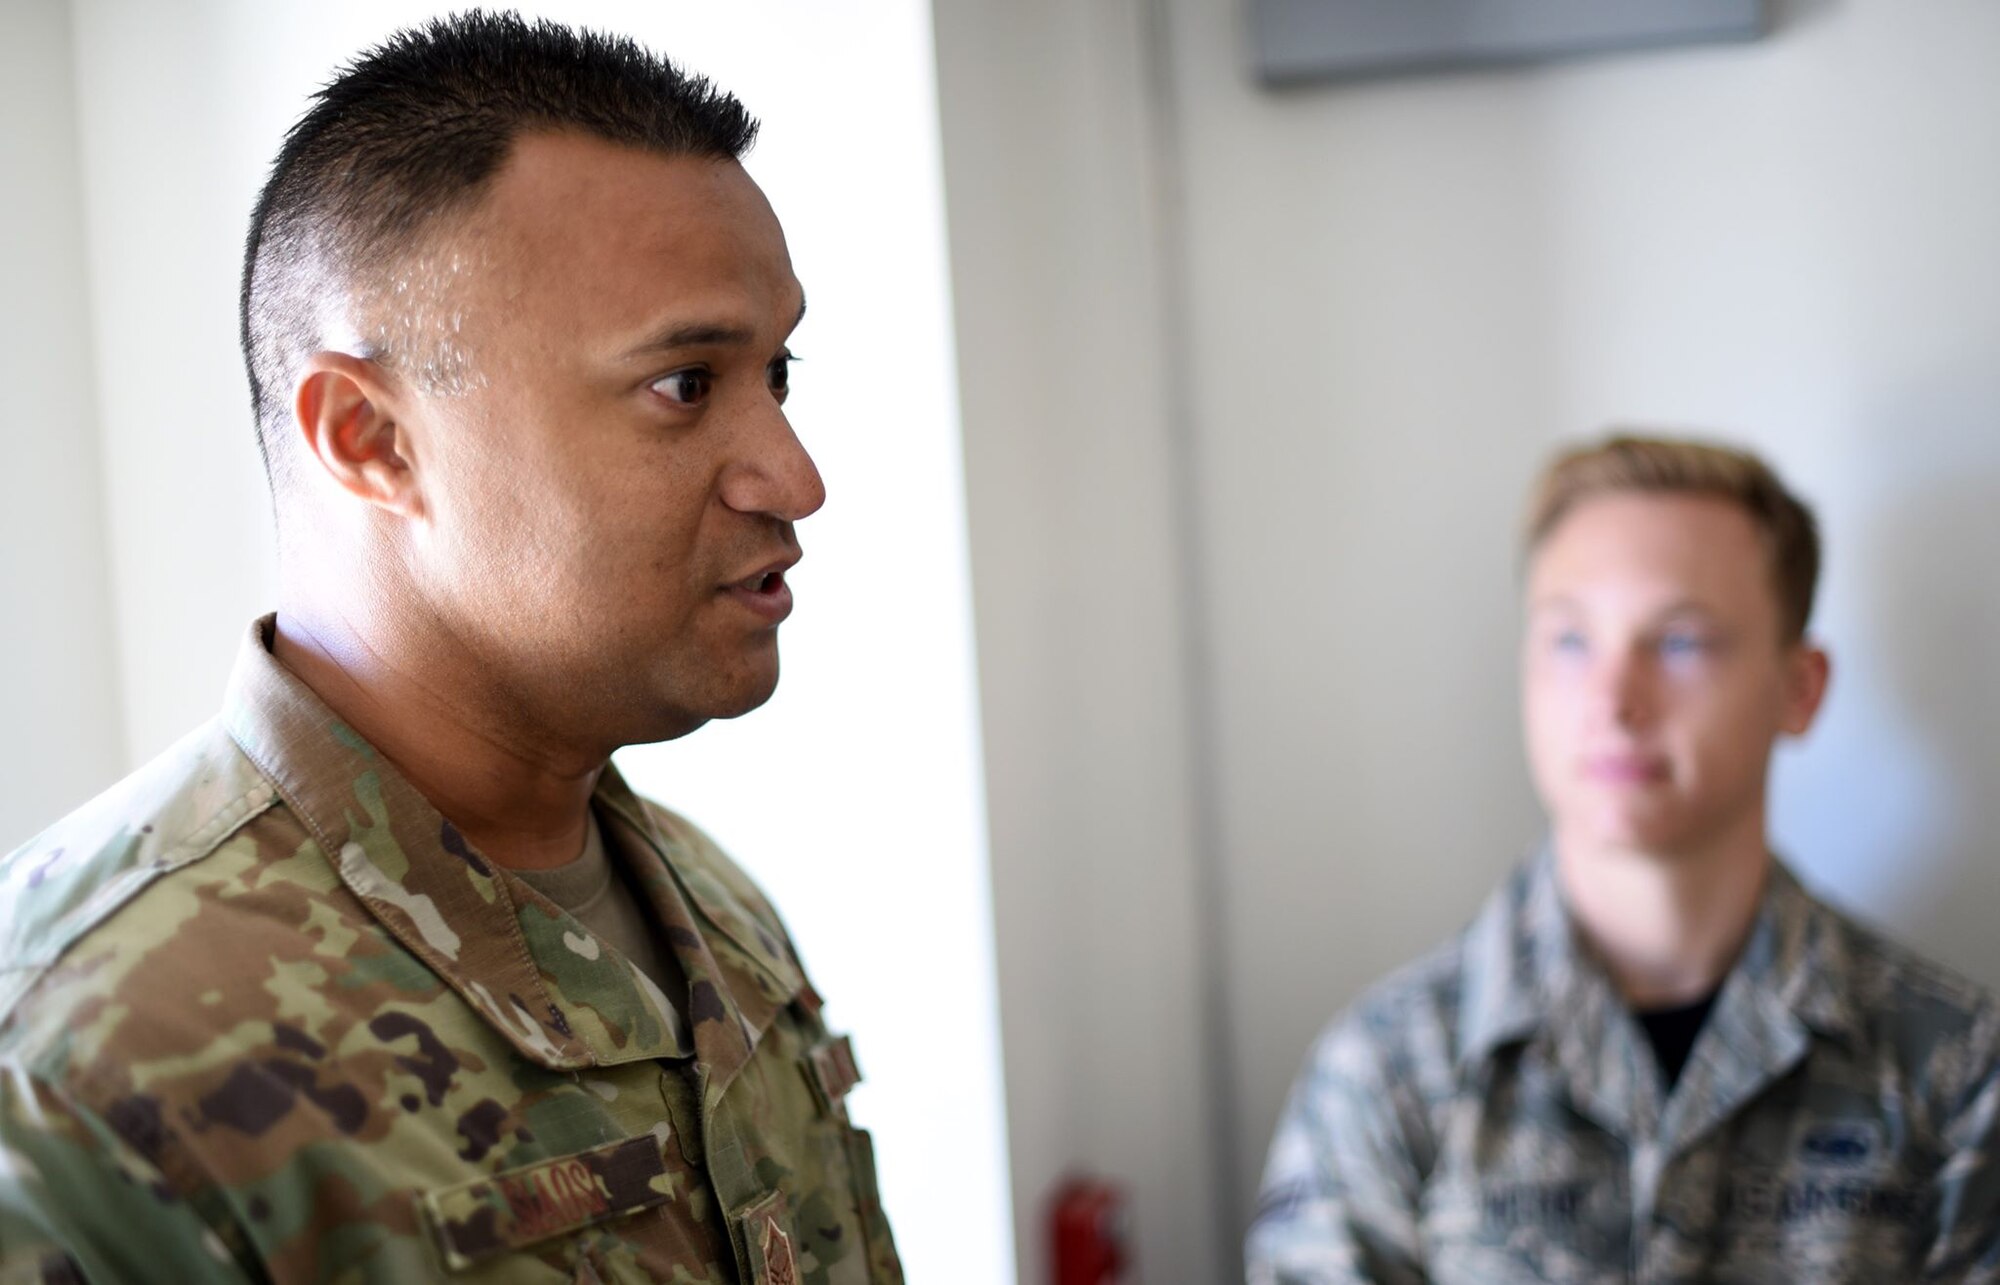 U.S. Air Force Master Sgt. Stanley Siaosi, 60th Operations Support Squadron chief controller, left, briefs control tower protocol to participants of an Airman enrichment day including Airman 1st Class Caden Victor, 860th Aircraft Maintenance Squadron aircraft maintainer, right, June 14, 2019, at Travis Air Force Base, California. The Airman enrichment day was the first of its kind in the Air Force and exposed Airmen of different Travis units to the jobs and mission contributions of other Air Force jobs. (U.S. Air Force photo by Senior Airman Christian Conrad)